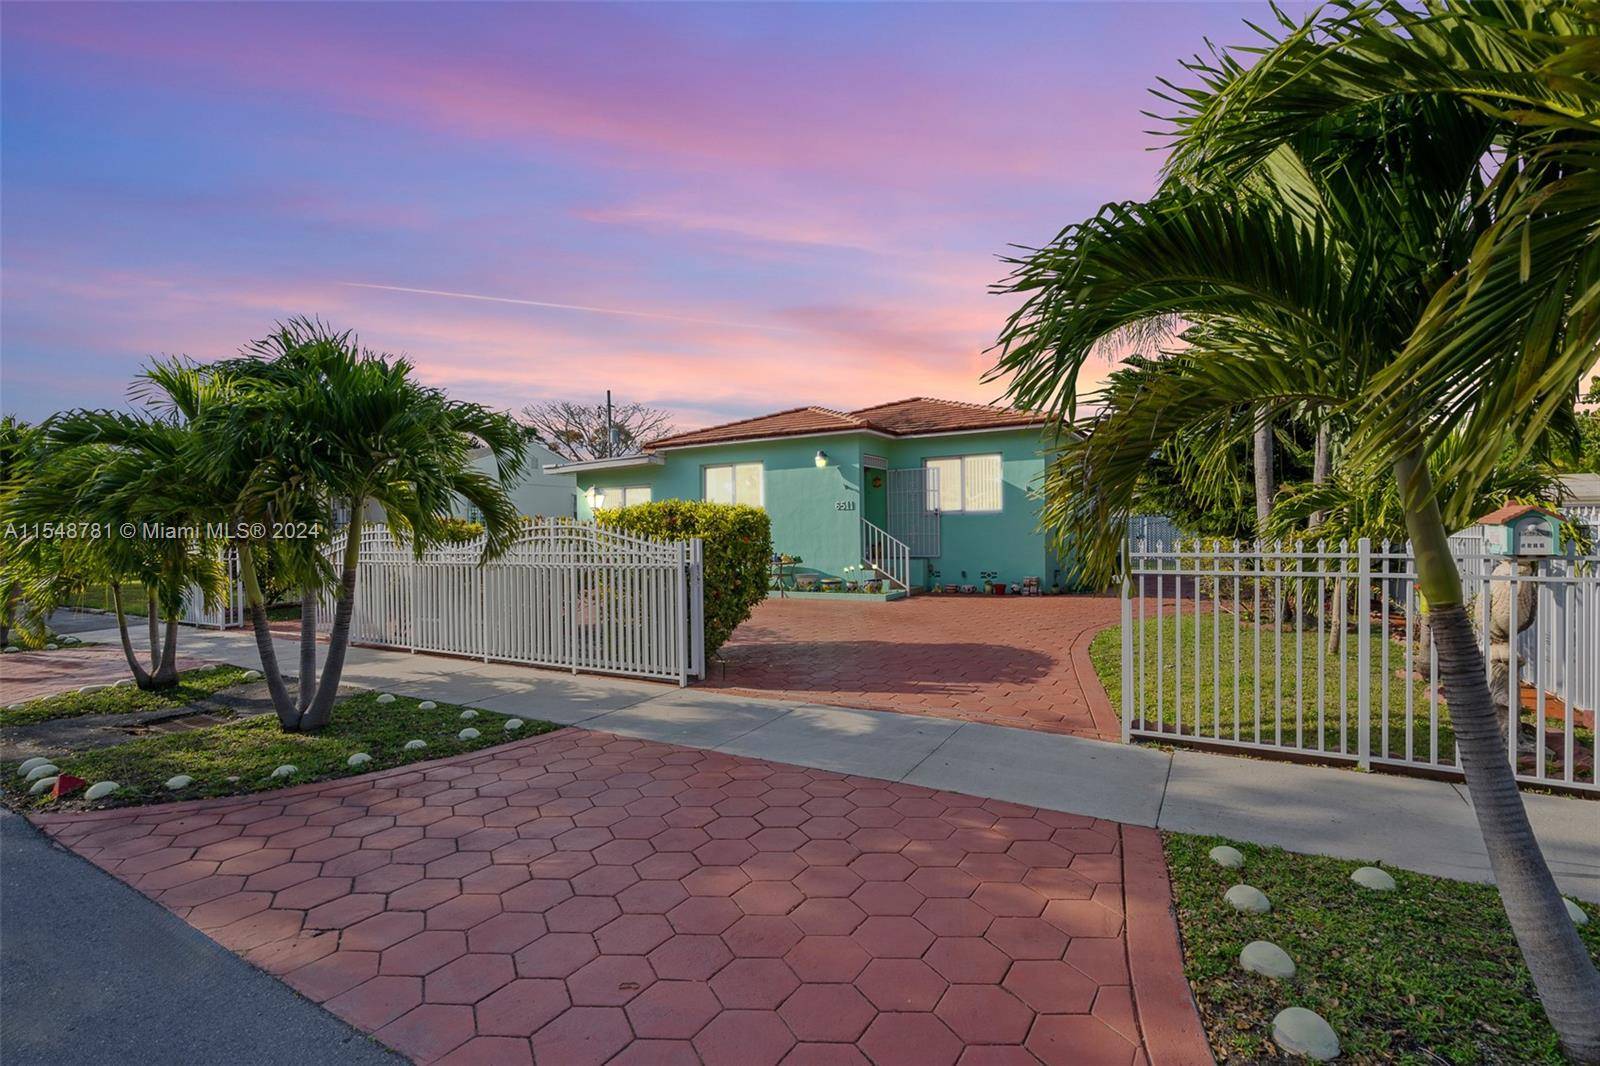 OPPORTUNITY Nestled in the vibrant and sought after neighborhood of West Miami, this charming residence offers the perfect blend of comfort and convenience.